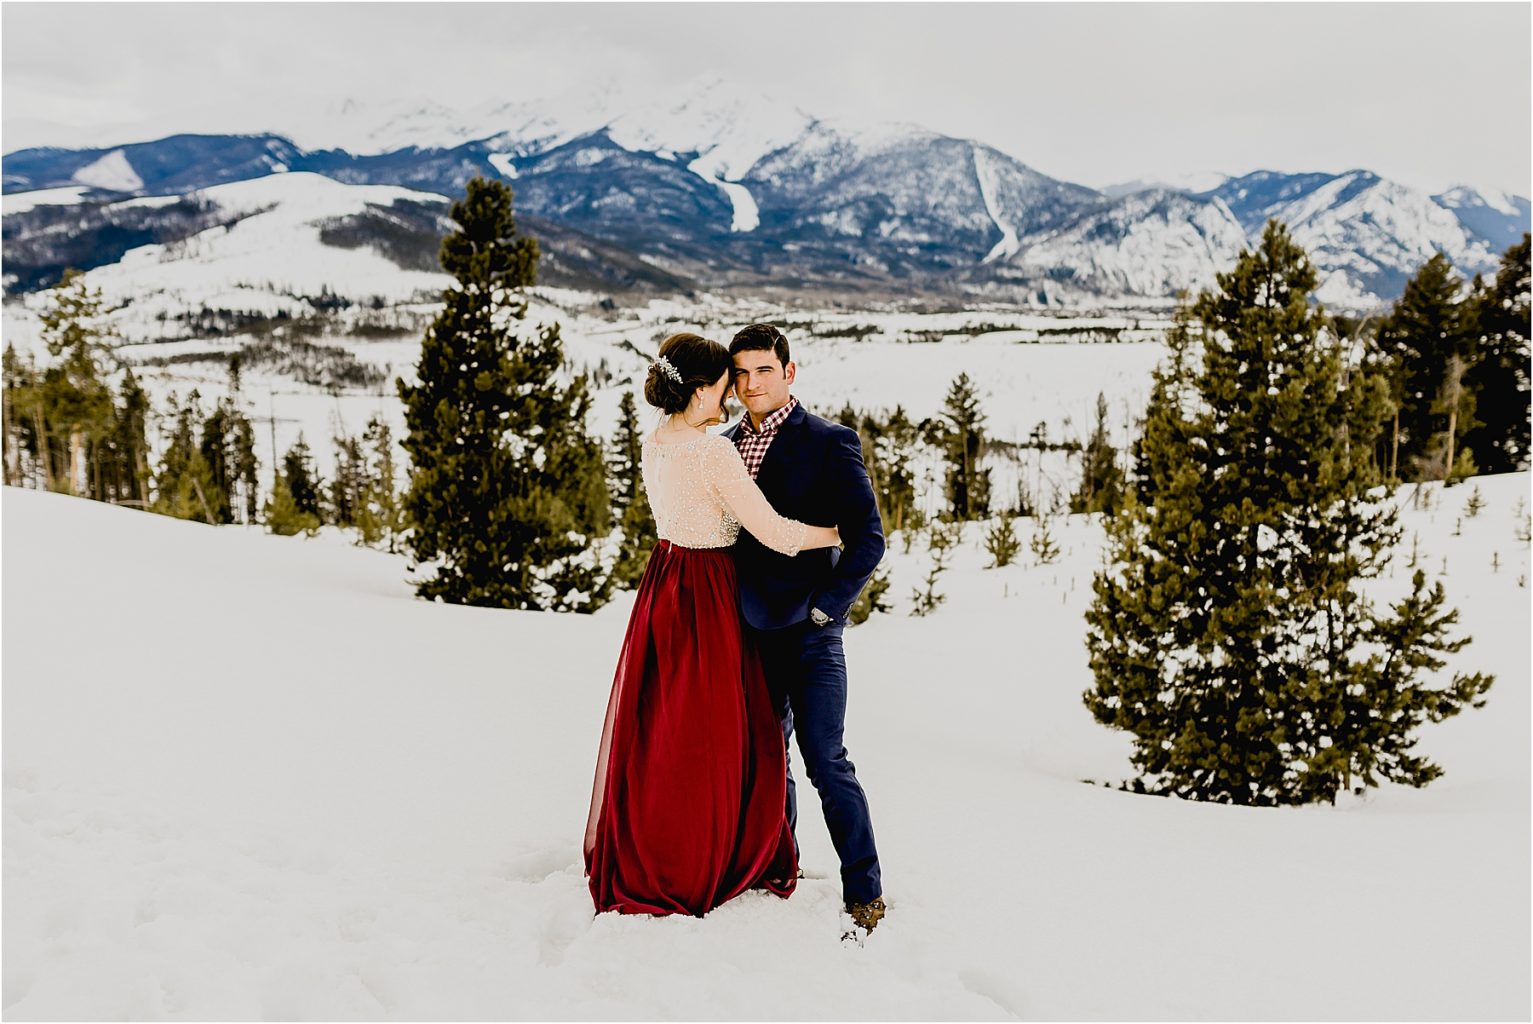 engagement photos taken in the rocky mountains of Breckenridge Colorado at sapphire point